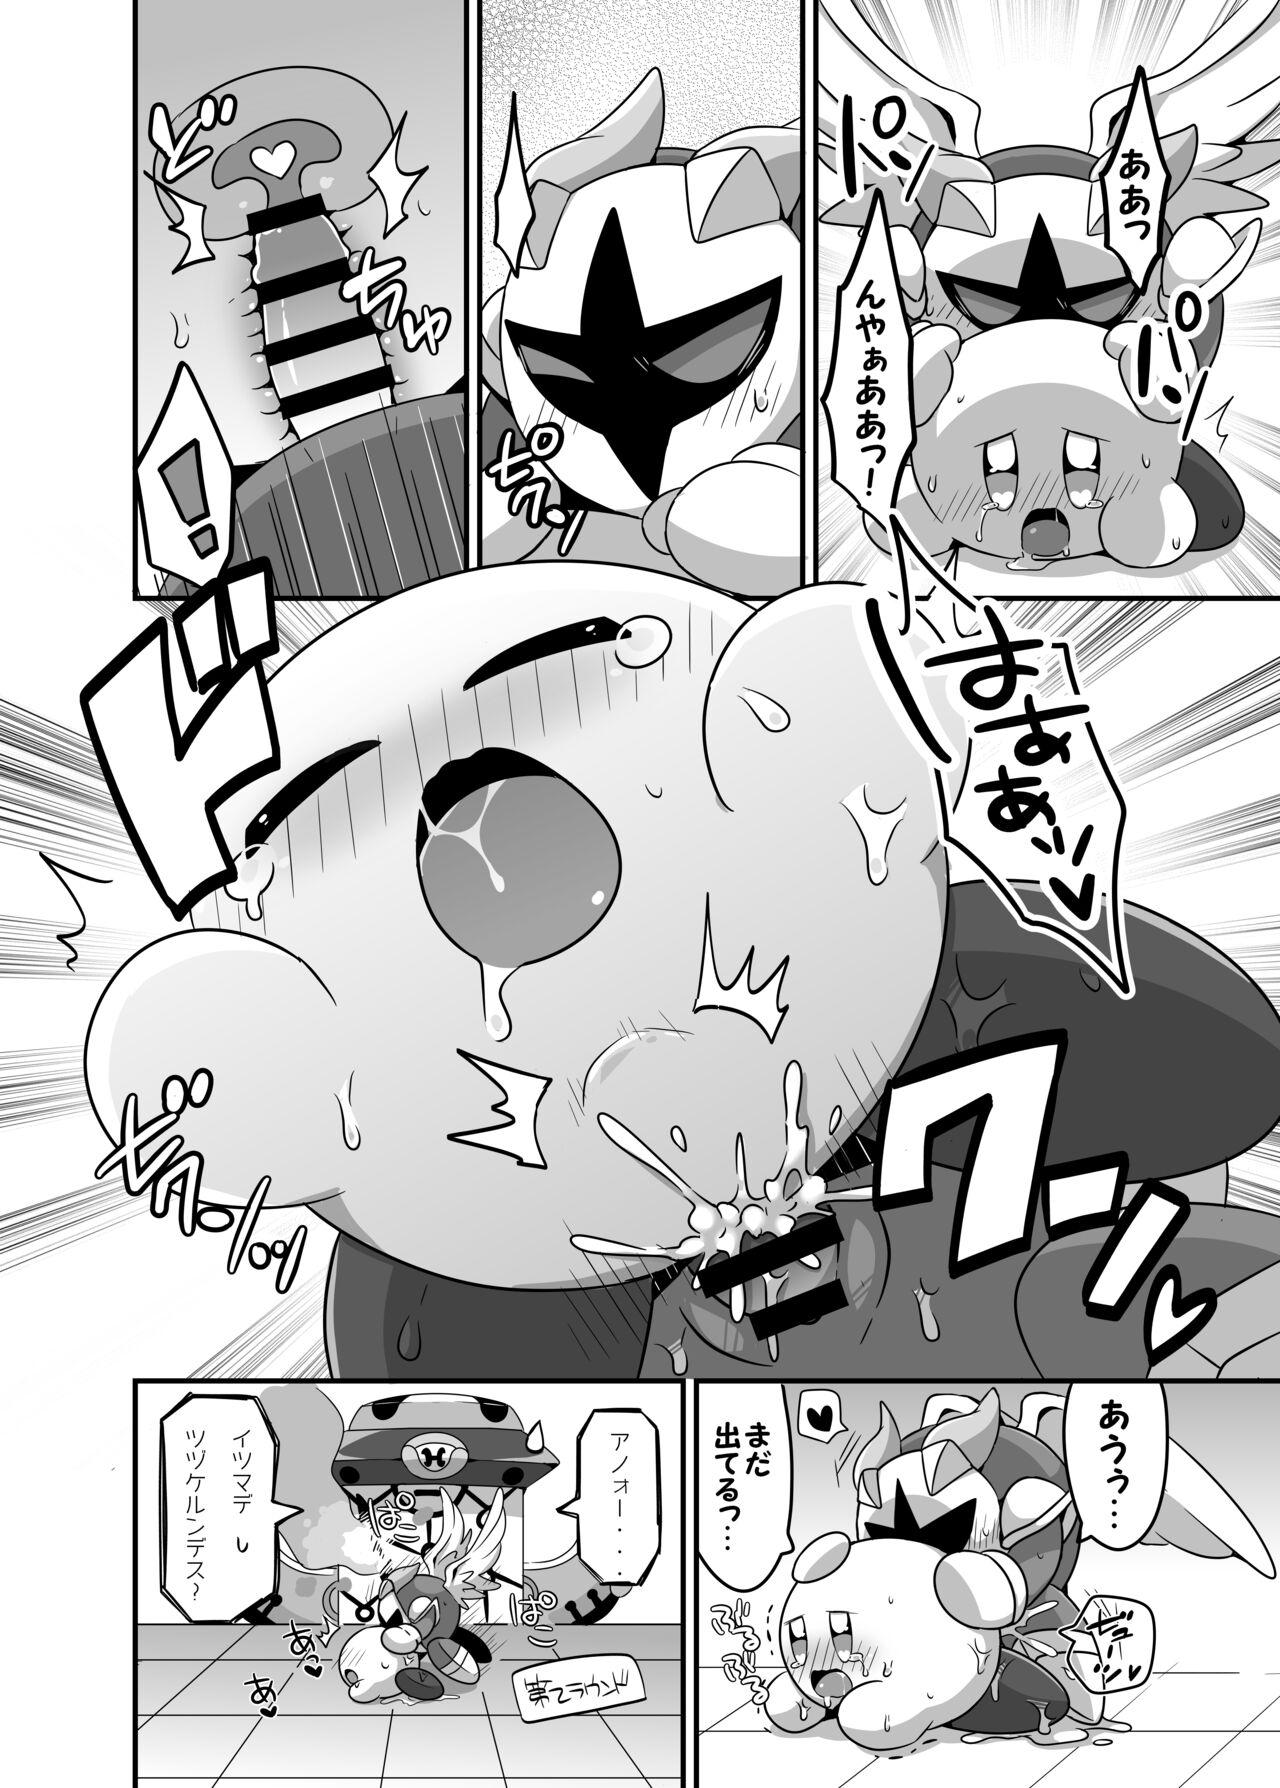 Lick I Want to Do XXX Even For Spheres! - Kirby Sex Pussy - Page 6